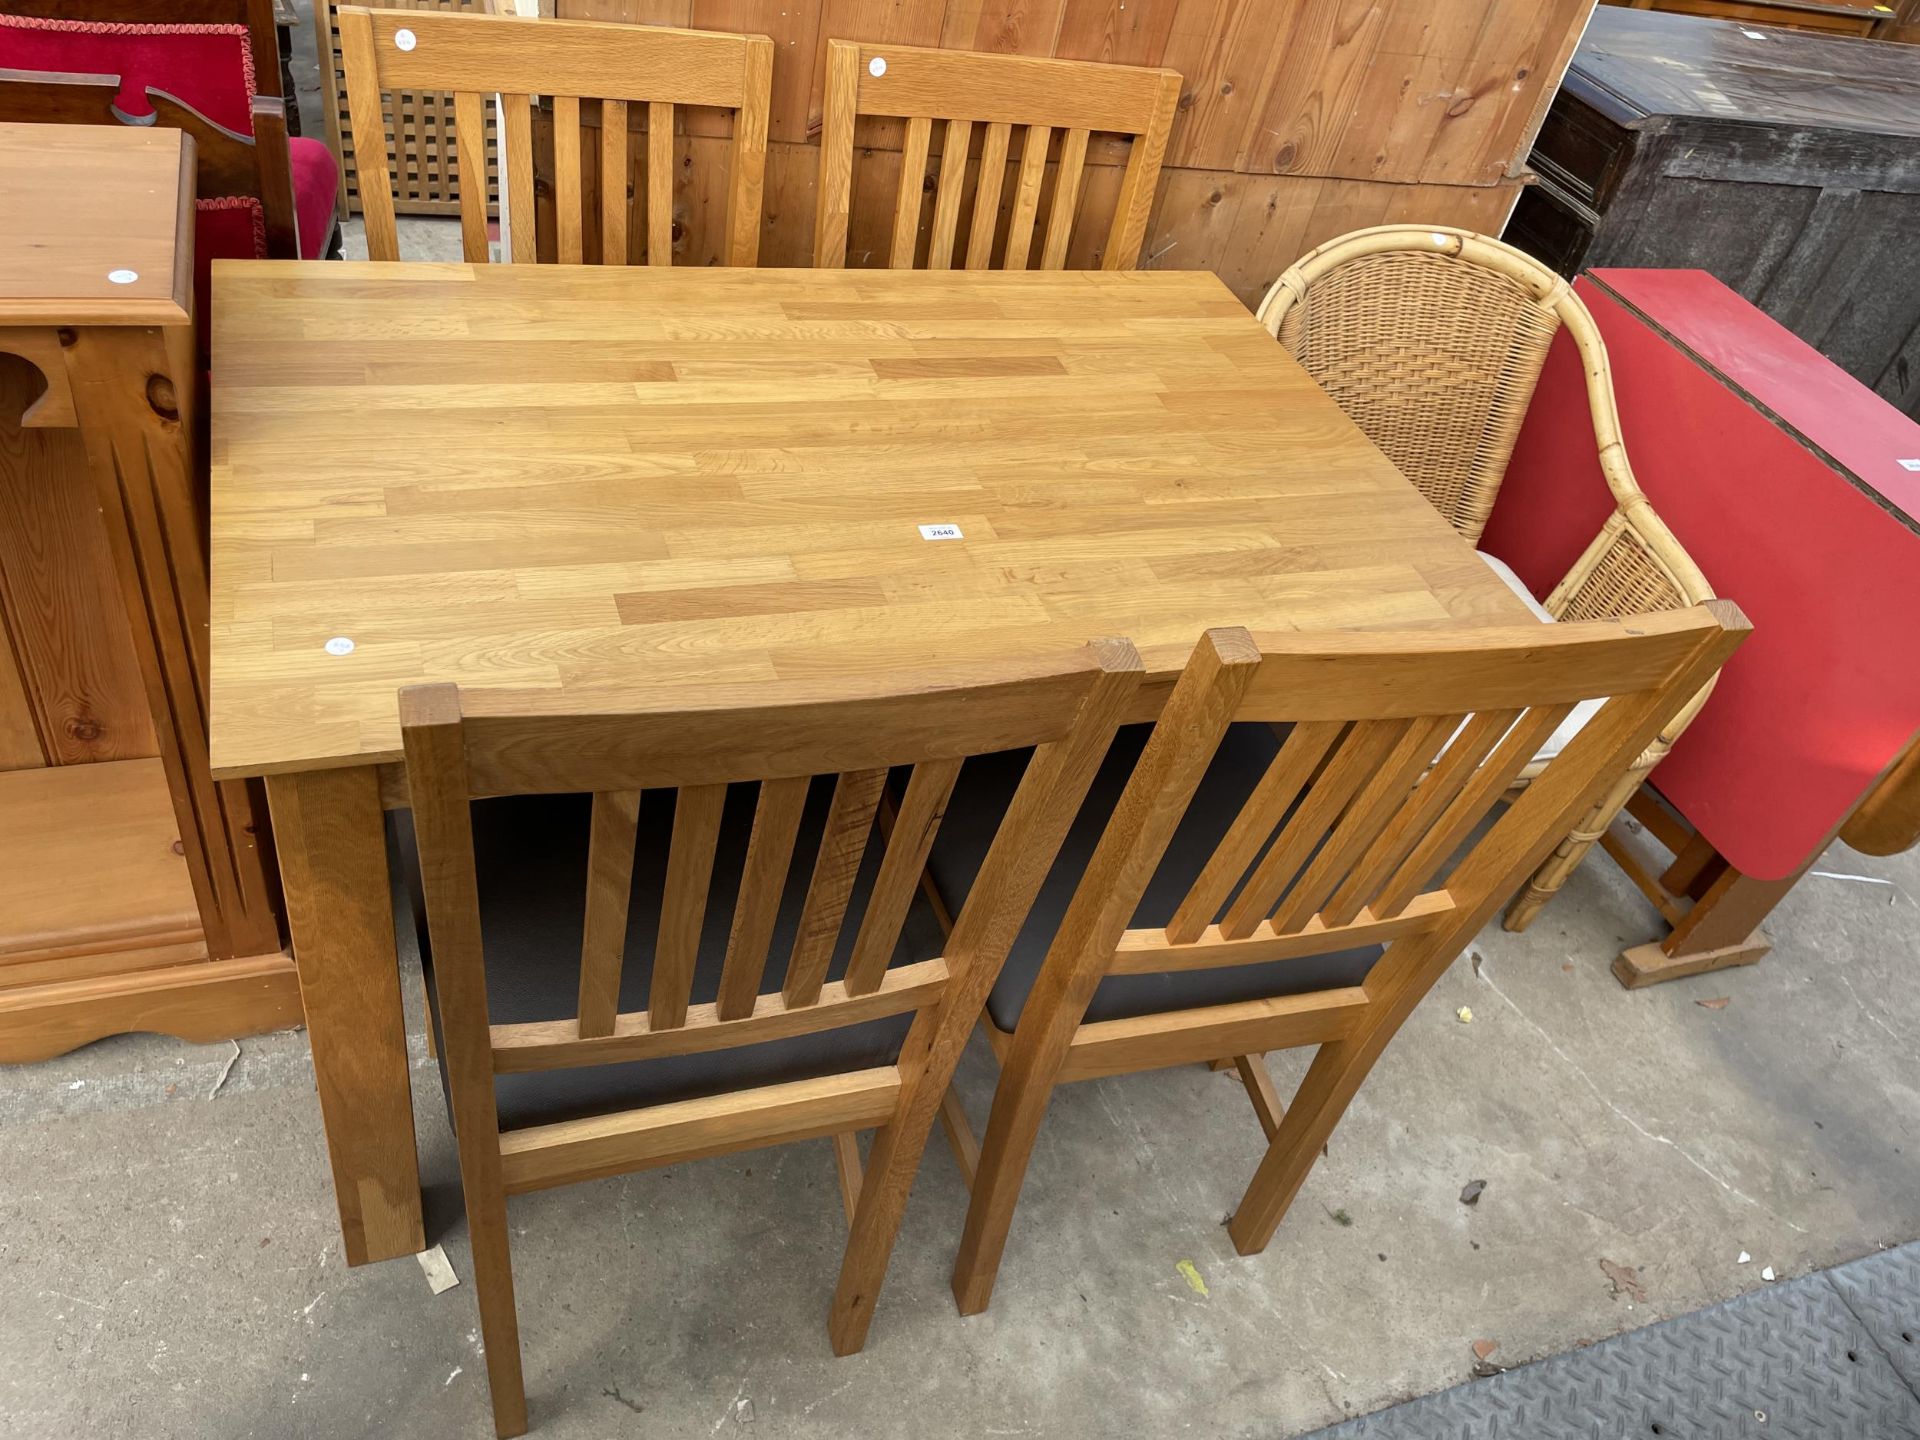 A MODERN OAK WOODBLOCK DINING TABLE, 45" X 28", AND FOUR CHAIRS